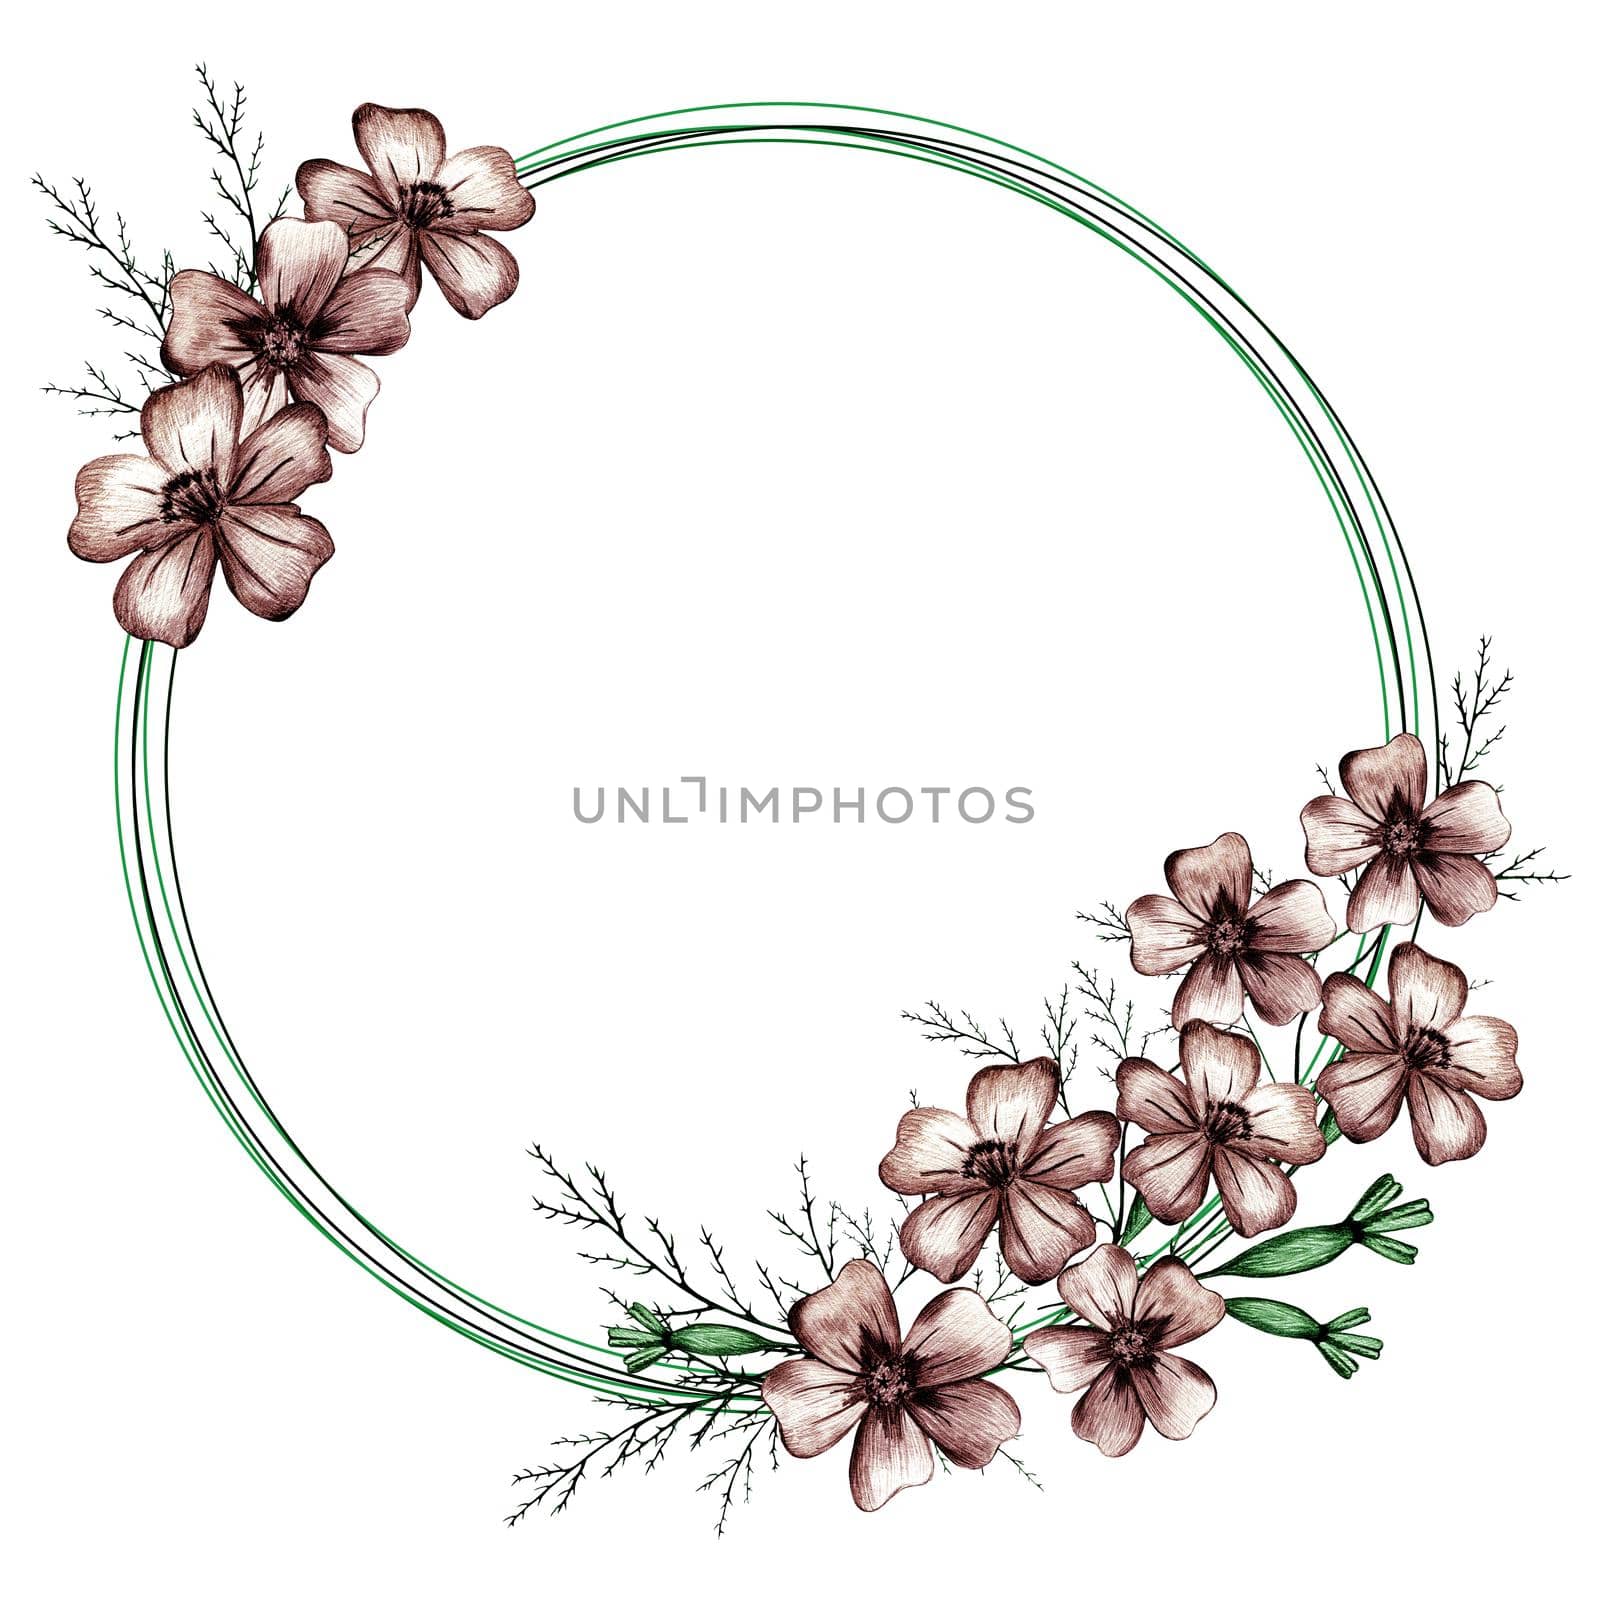 Cute Wreath with Flowers, Leaves and Branches Drawn by Colored Pencils. Hand Drawn Circle Frame for Your Text on White Background.